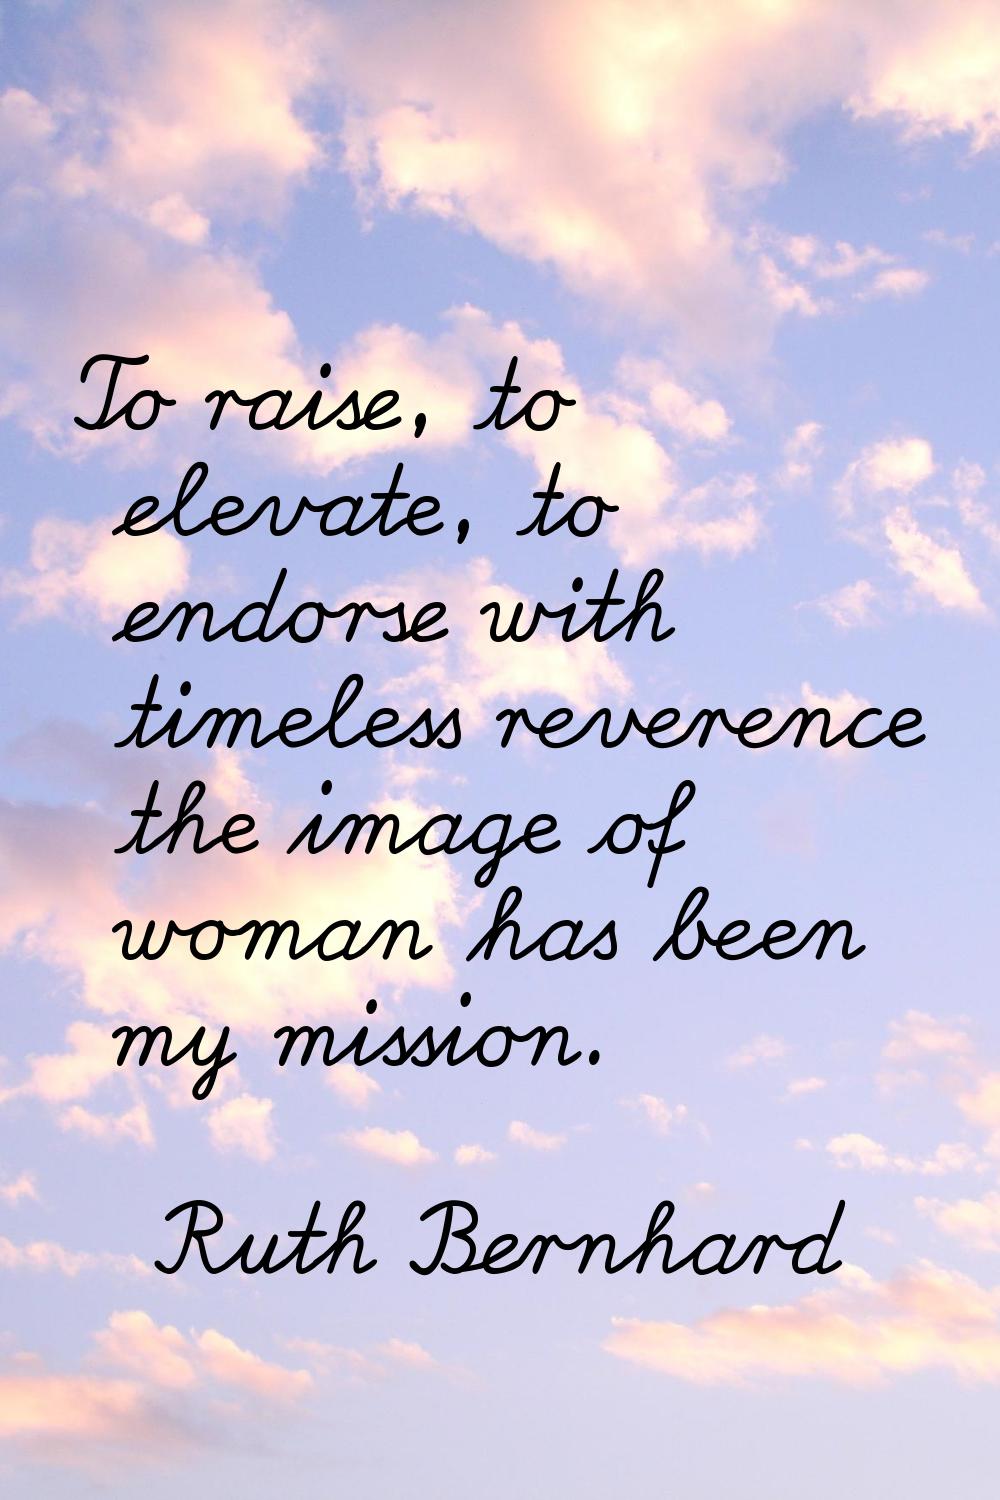 To raise, to elevate, to endorse with timeless reverence the image of woman has been my mission.